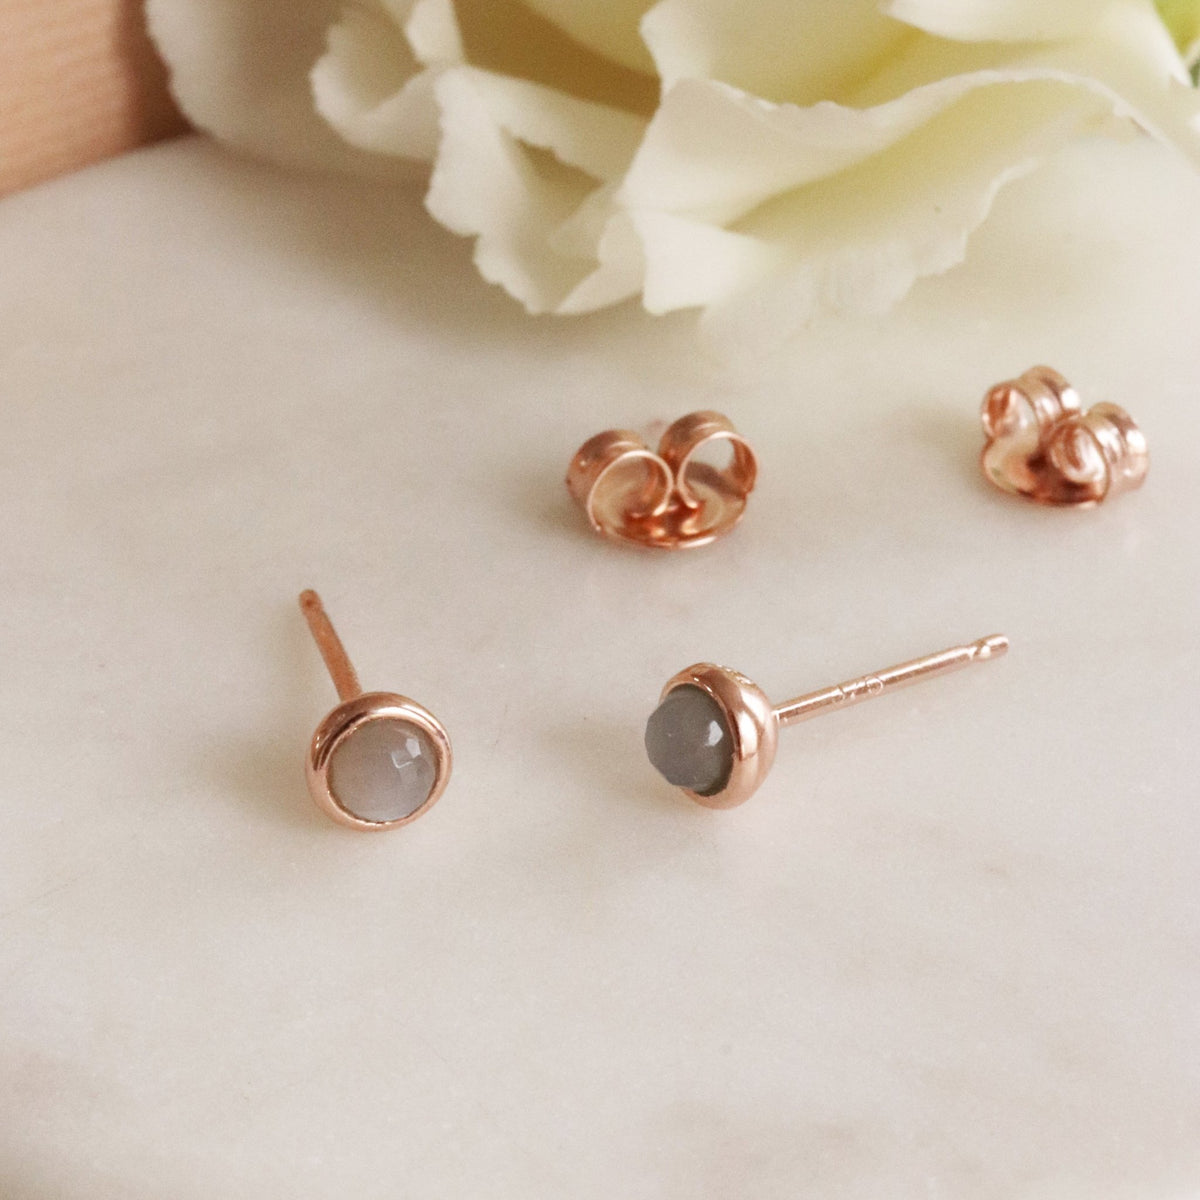 TINY PROTECT STUD EARRINGS - GREY MOONSTONE &amp; ROSE GOLD - SO PRETTY CARA COTTER